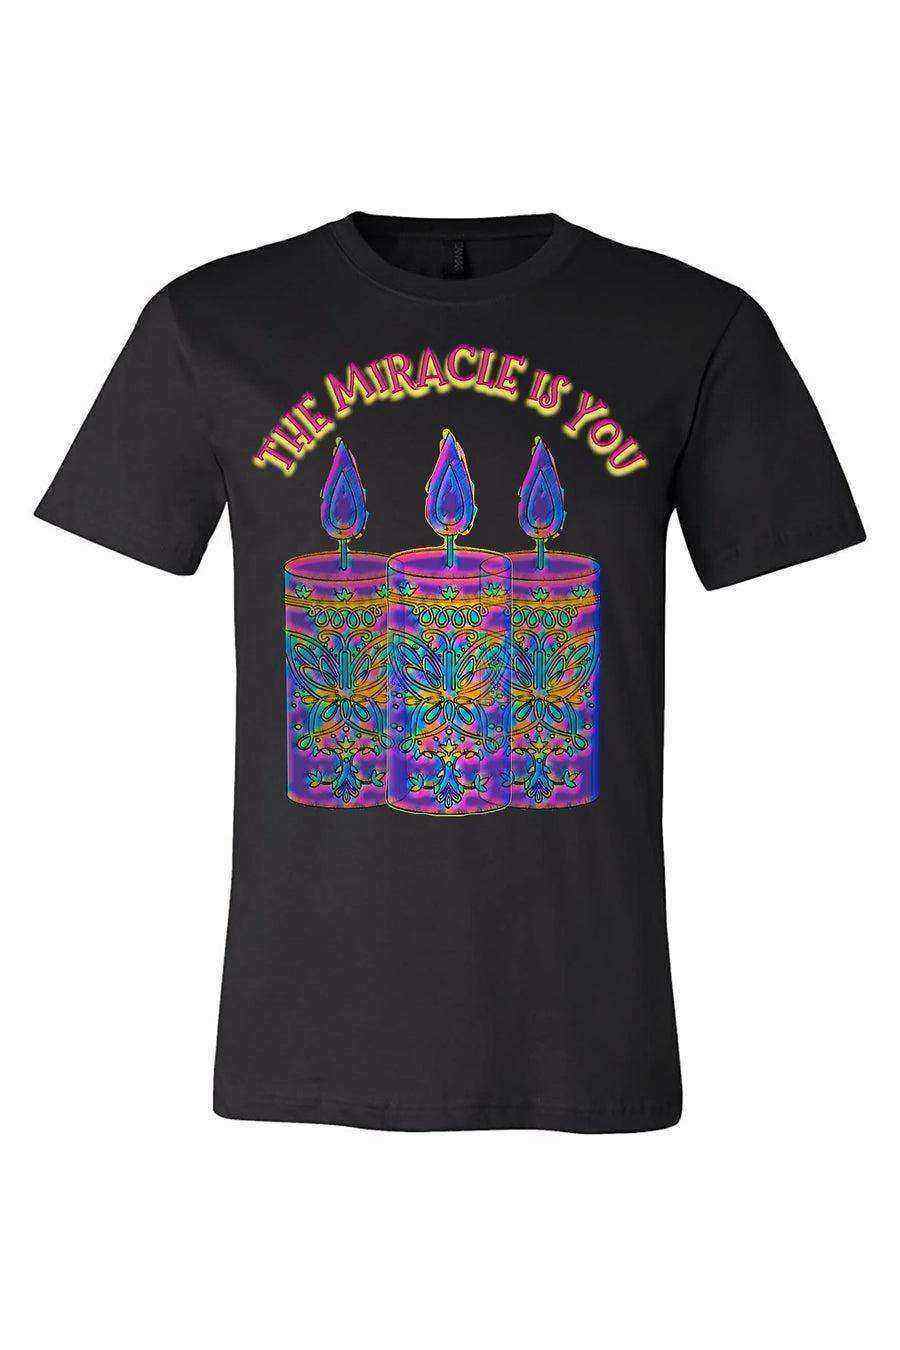 The Miracle Is You Shirt | Encanto Songs - Dylan's Tees